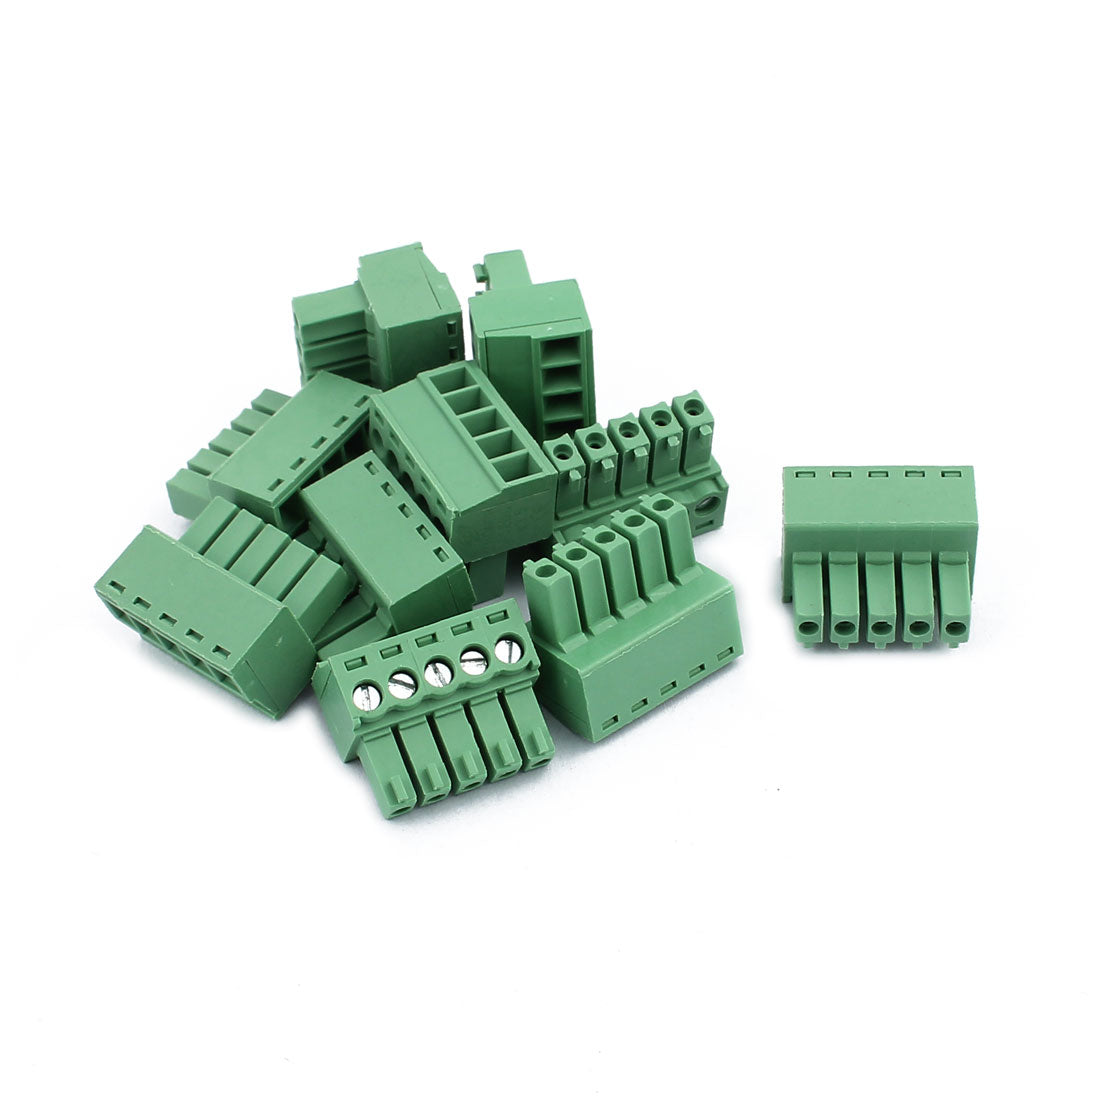 uxcell Uxcell 10Pcs 300V KF2EDGK 3.5mm Pitch 5-Pin PCB Screw Terminal Block Connector